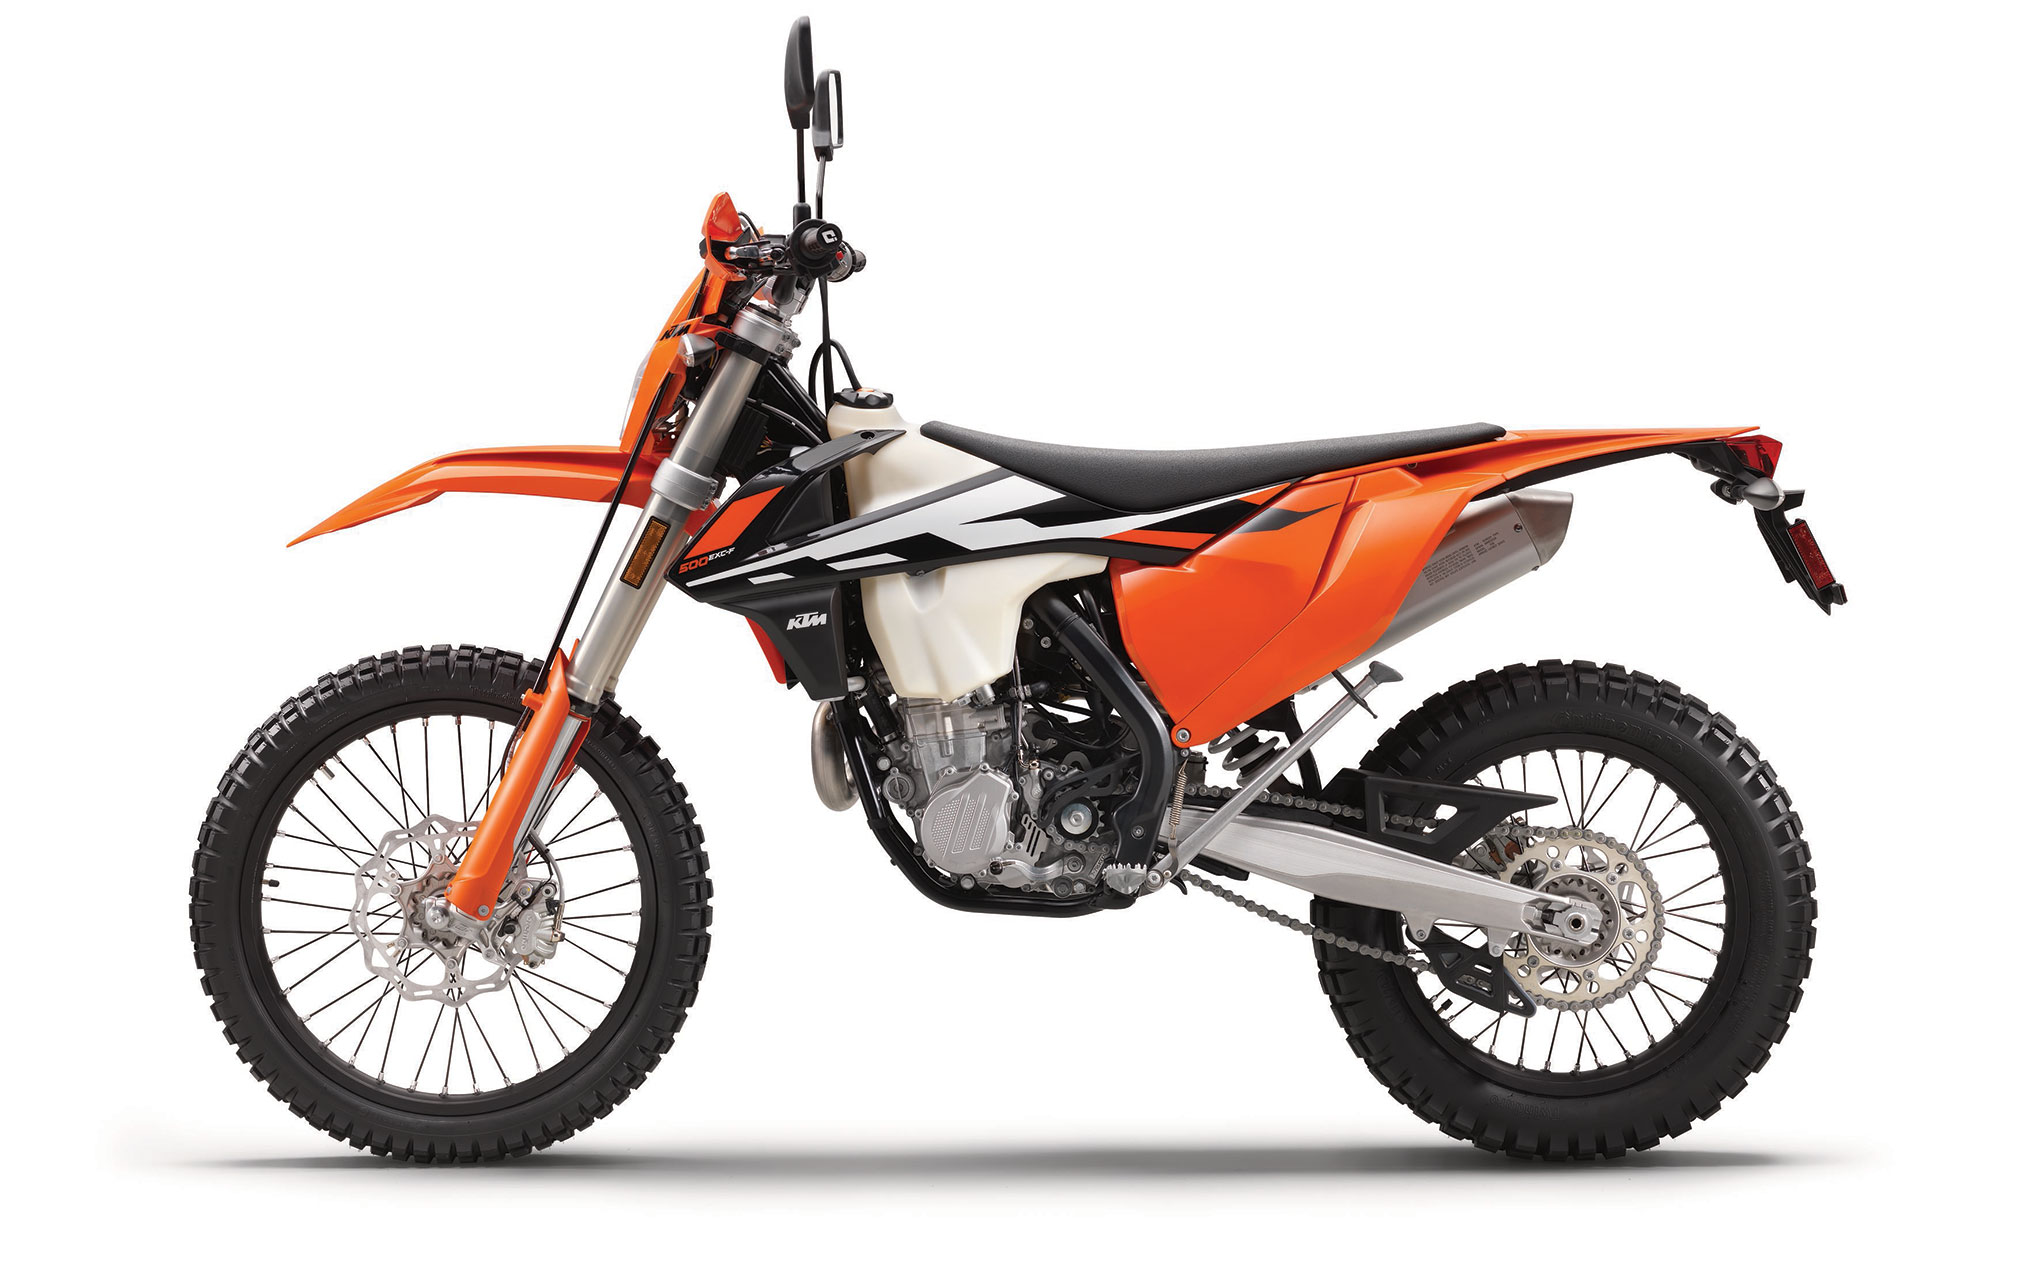 Amazing KTM 500 EXC Pictures & Backgrounds